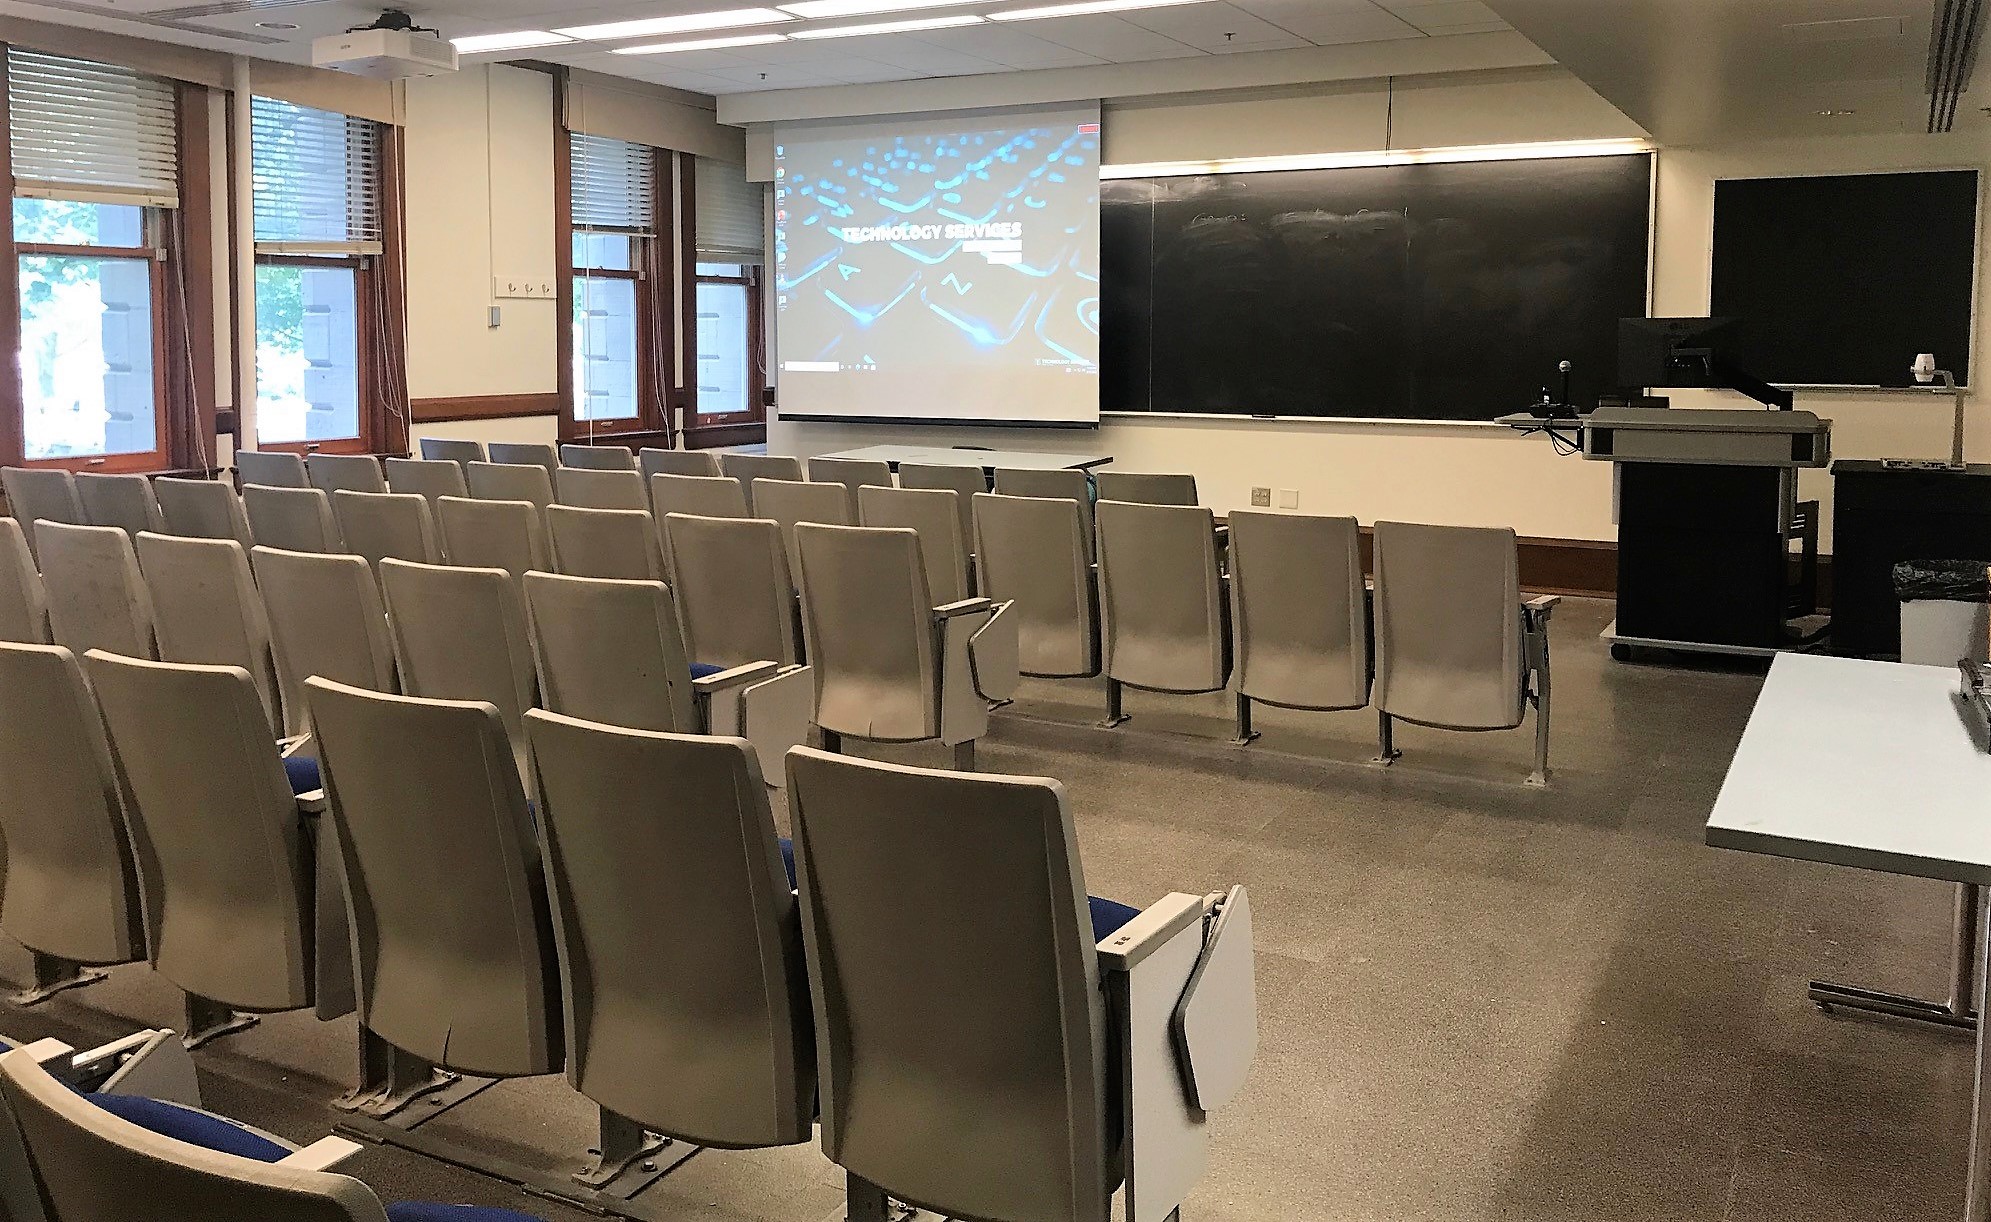 A view of the classroom with theater auditorium seating, chalkboard, projection screen, and instructor lectern in front.